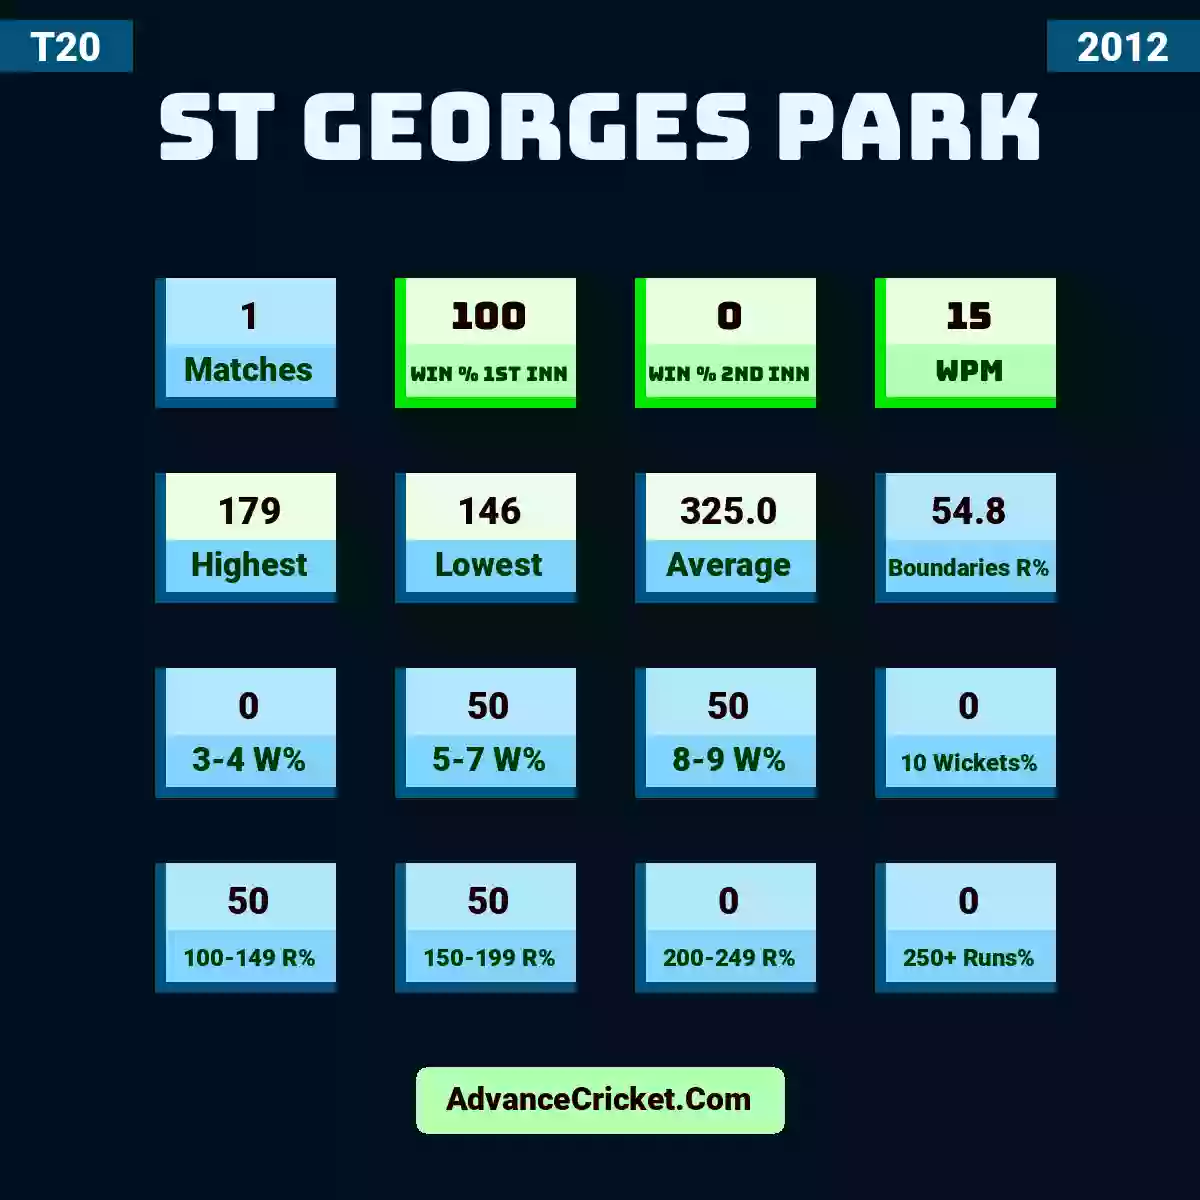 Image showing St Georges Park with Matches: 1, Win % 1st Inn: 100, Win % 2nd Inn: 0, WPM: 15, Highest: 179, Lowest: 146, Average: 325.0, Boundaries R%: 54.8, 3-4 W%: 0, 5-7 W%: 50, 8-9 W%: 50, 10 Wickets%: 0, 100-149 R%: 50, 150-199 R%: 50, 200-249 R%: 0, 250+ Runs%: 0.